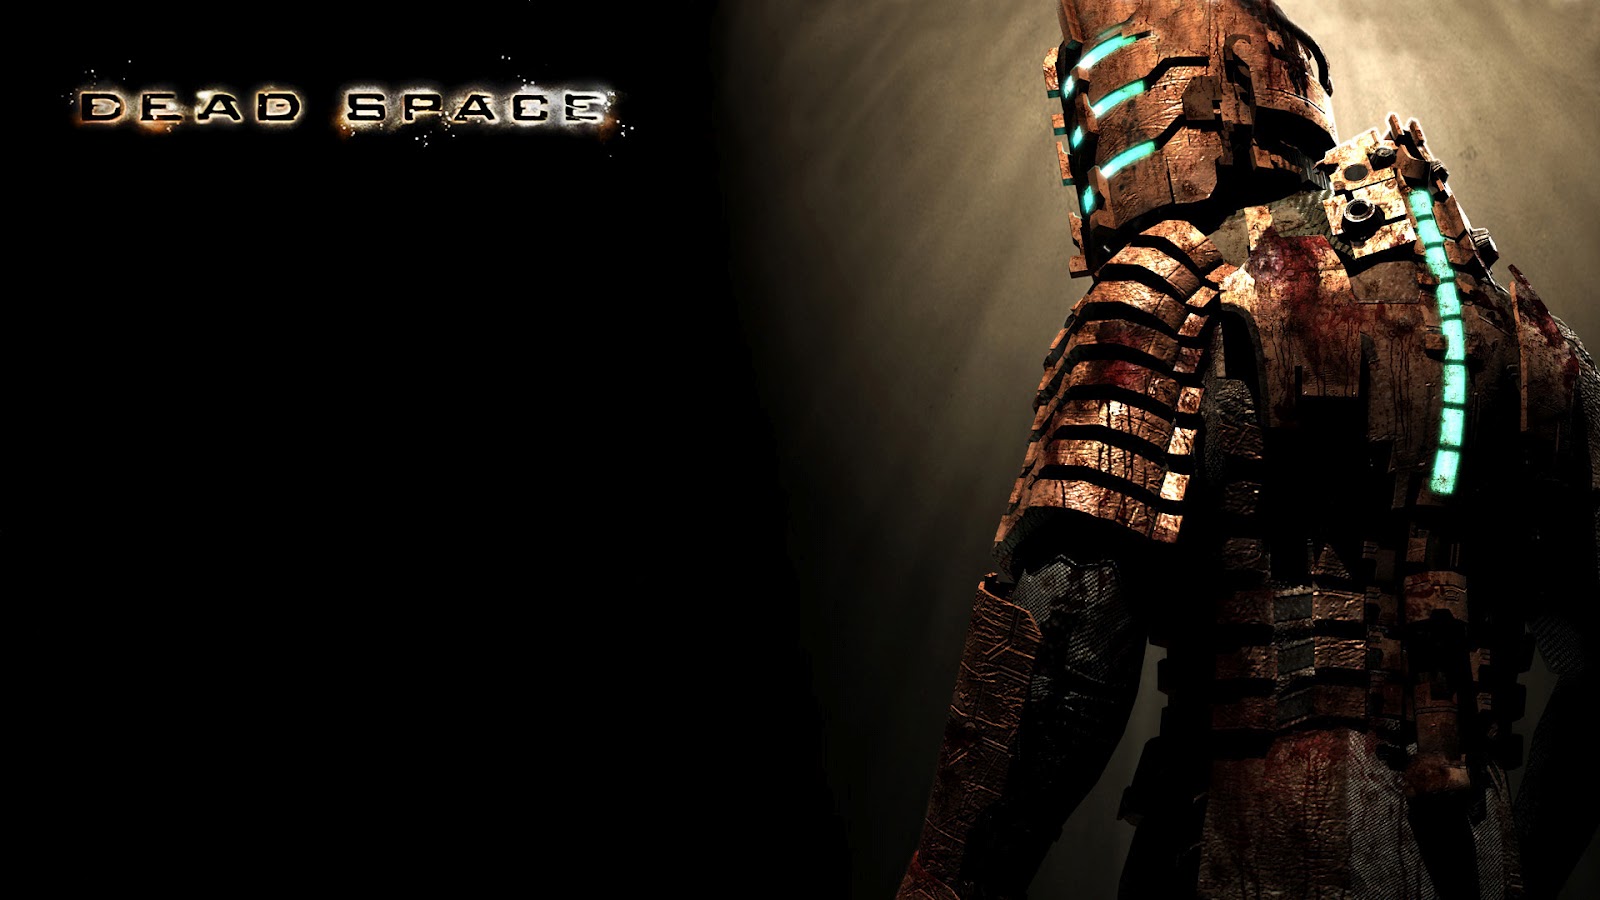 DeadSpace1wallpapers5 Dead Space 1 Wallpapers in HD 1080p